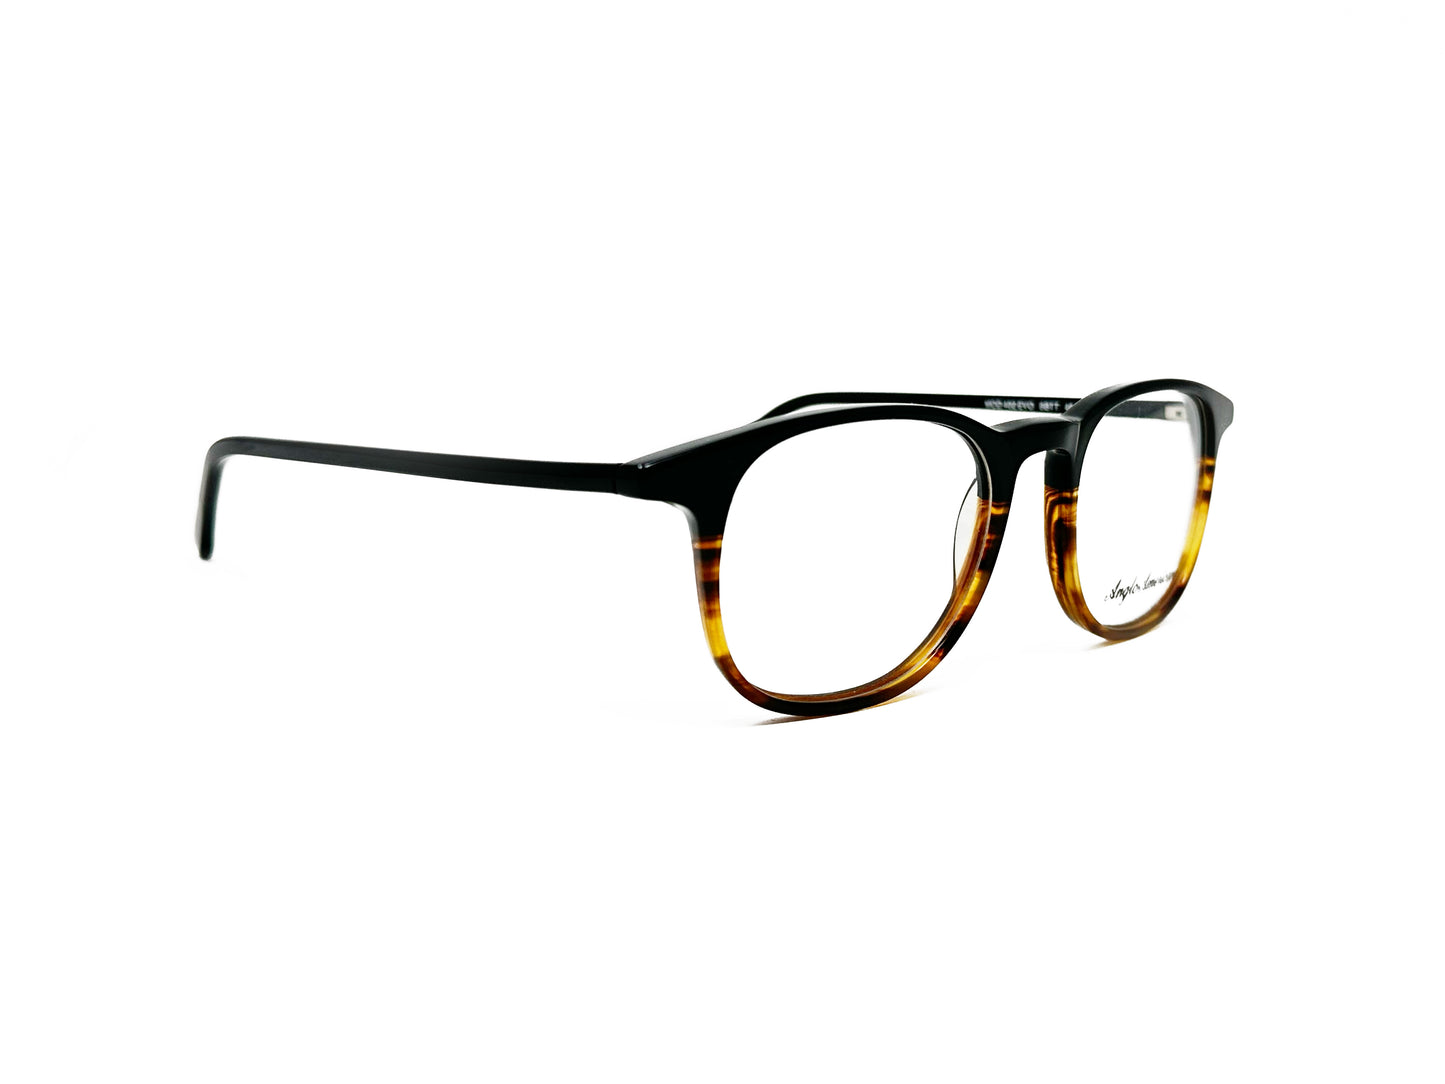 Anglo American Optical rounded-square, acetate, optical frame. Model: 402EVO. Color: BBTT - Black with tortoise-striped bottom. Side view.